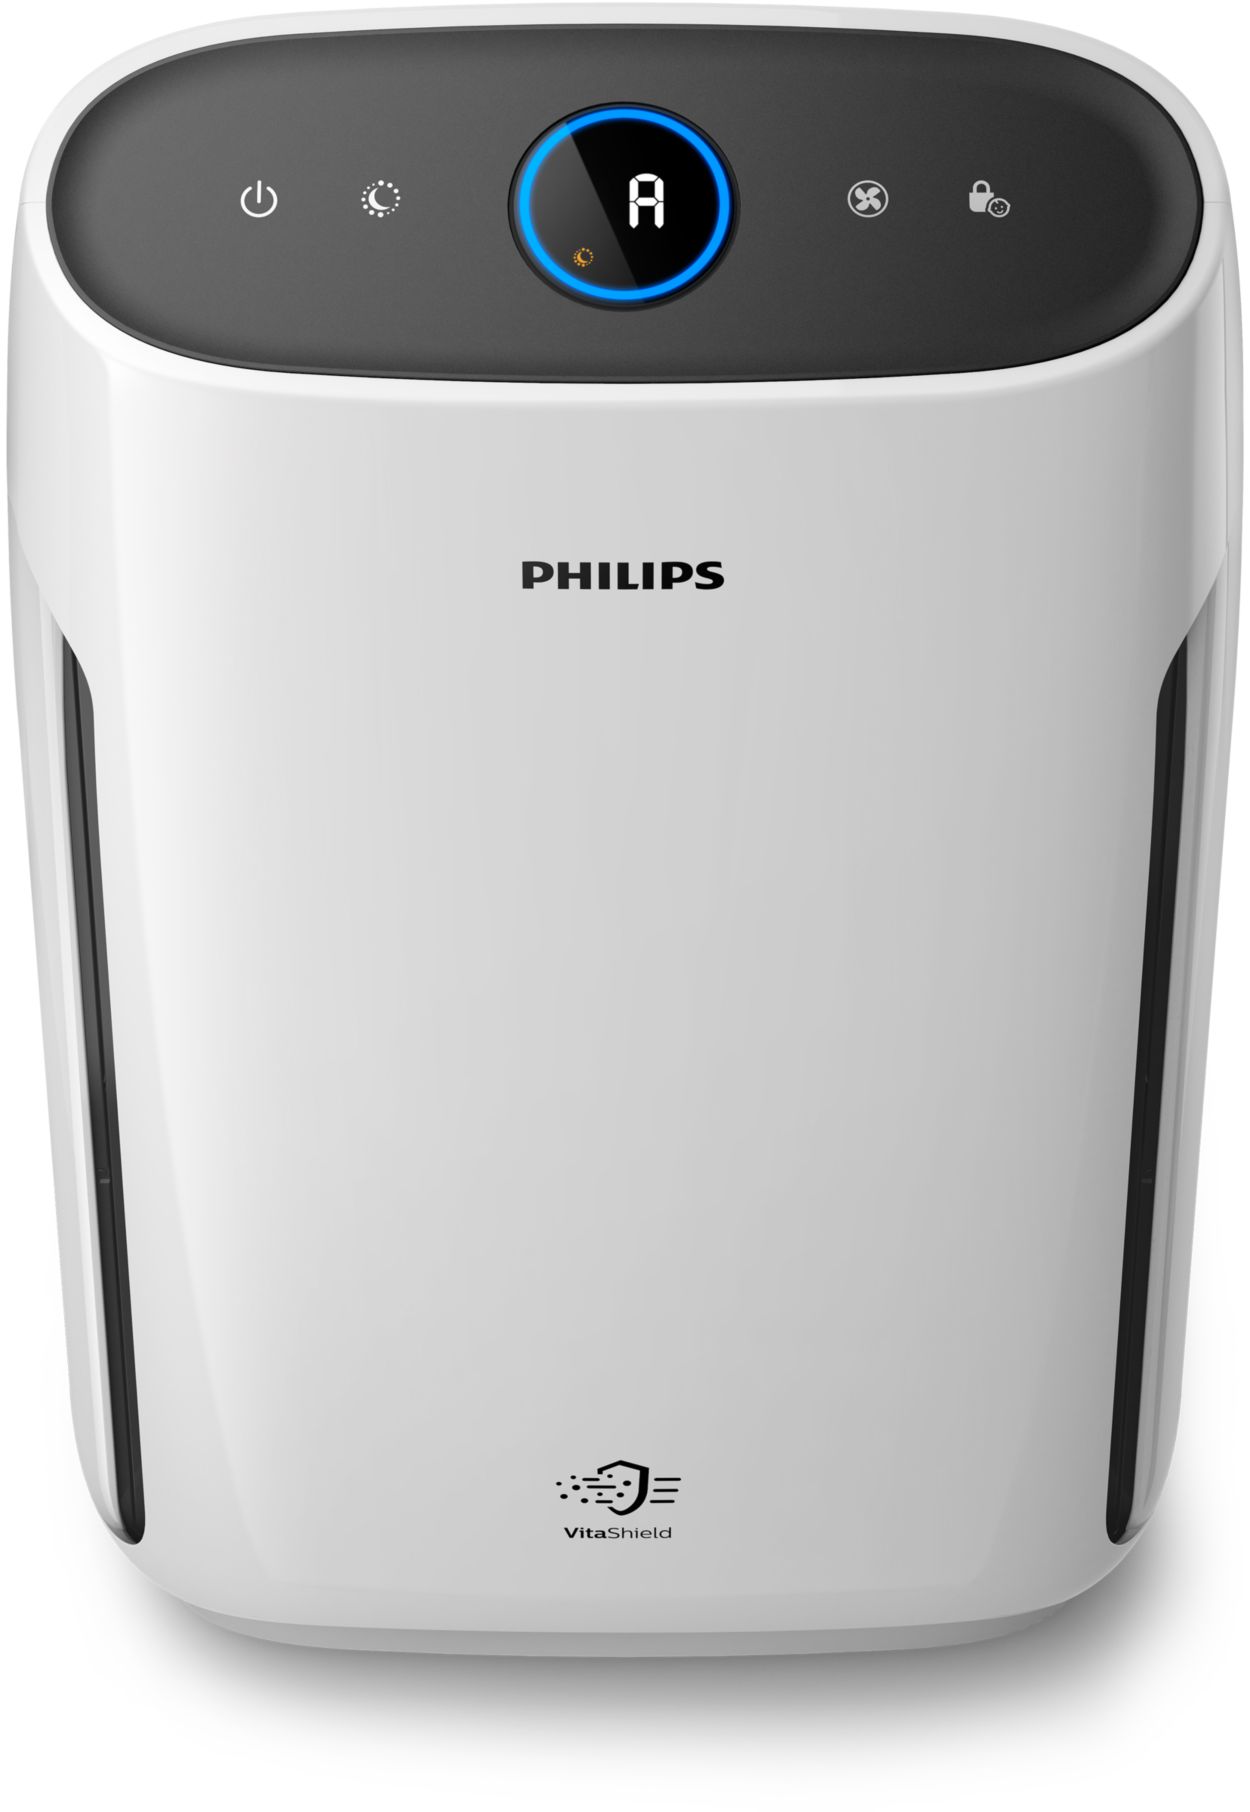 Philips 1217 air purifier review